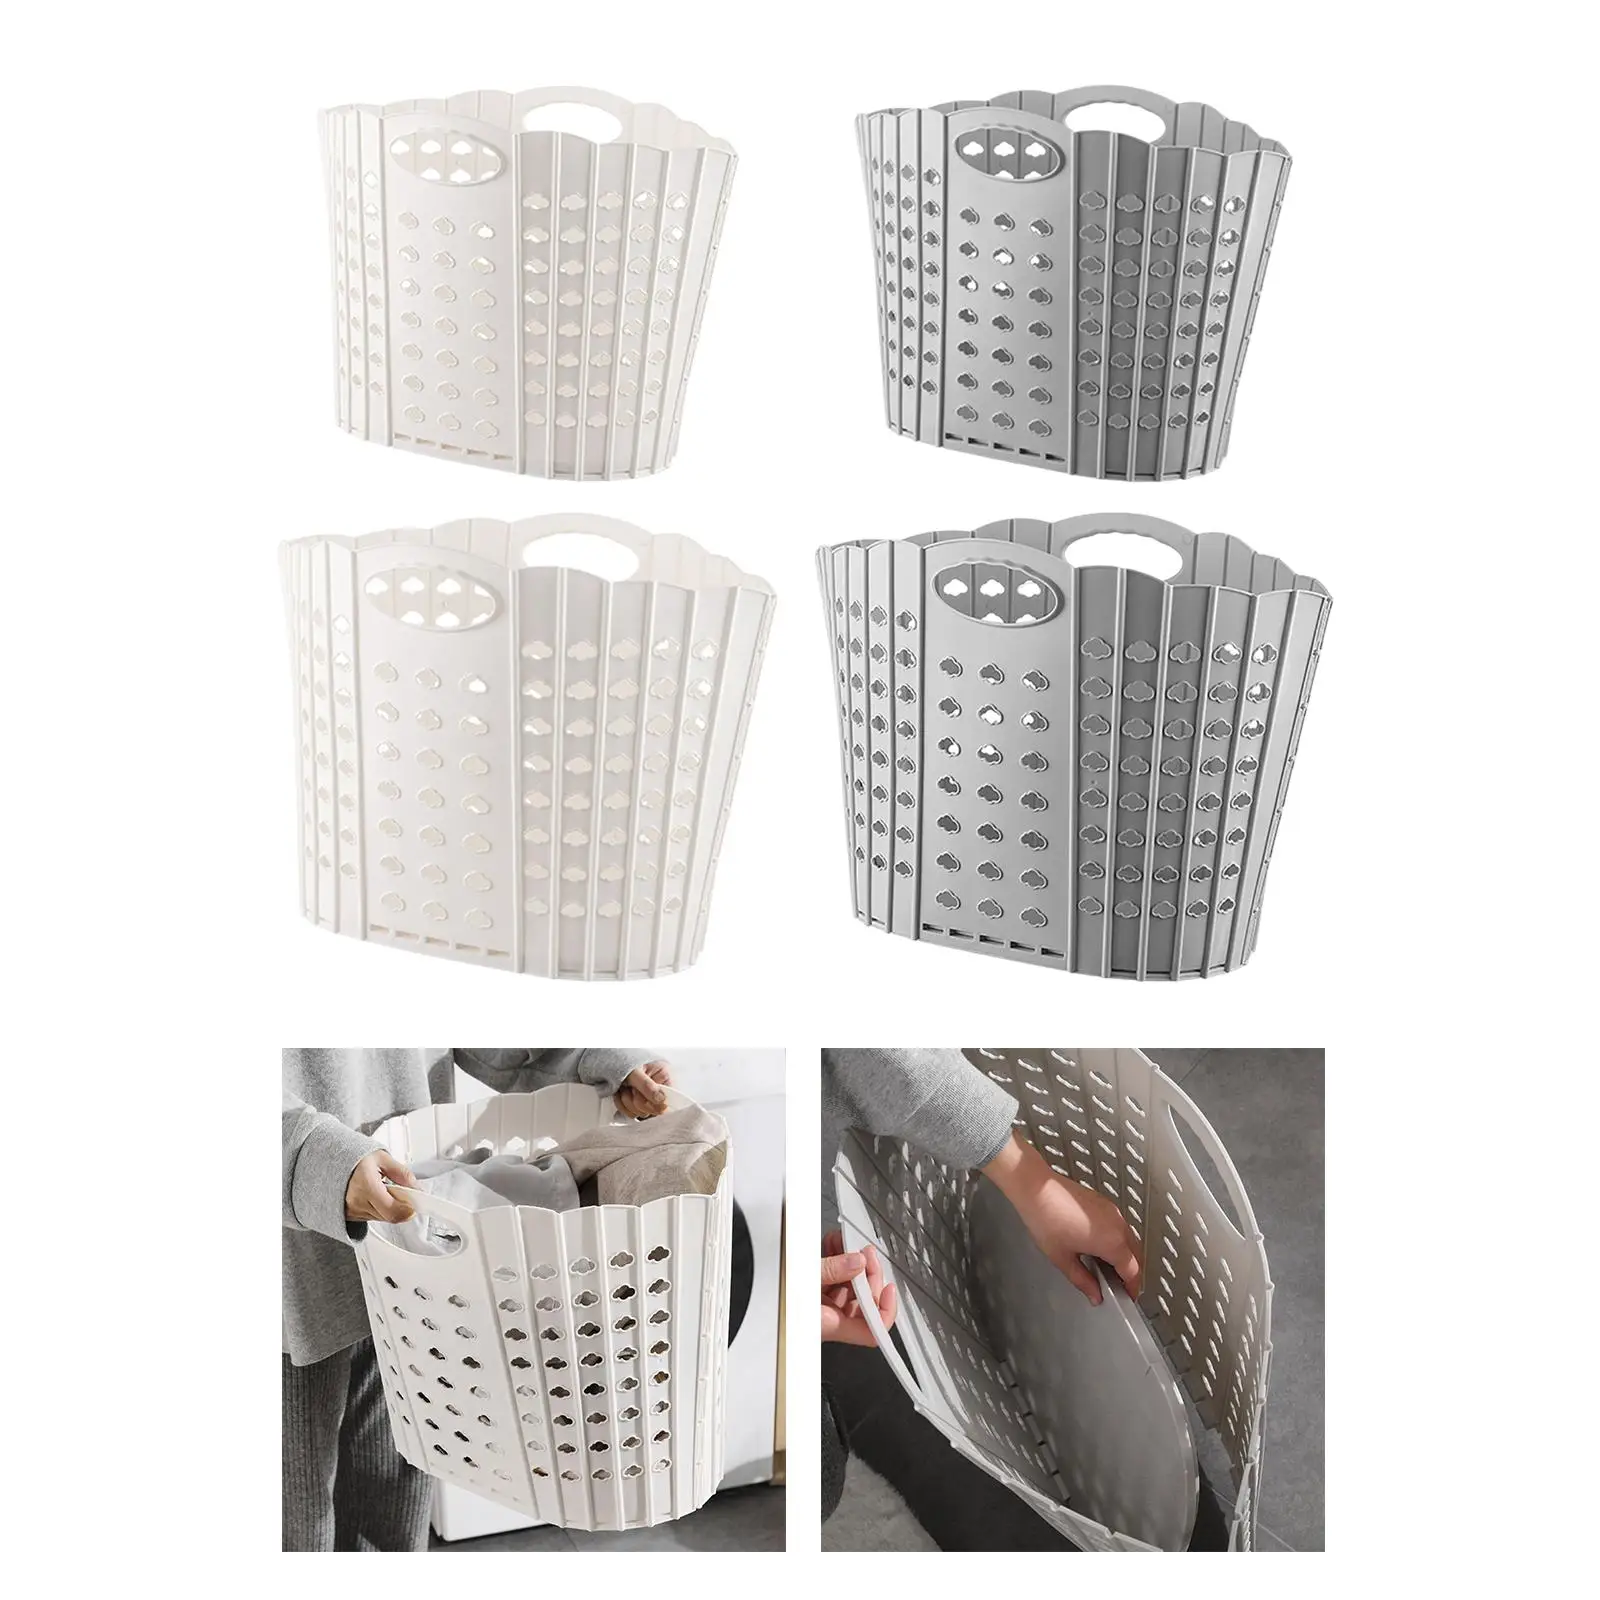 Collapsible Laundry Hamper, Fully Ventilated Flexible Dirty Clothes Bag for Dorm